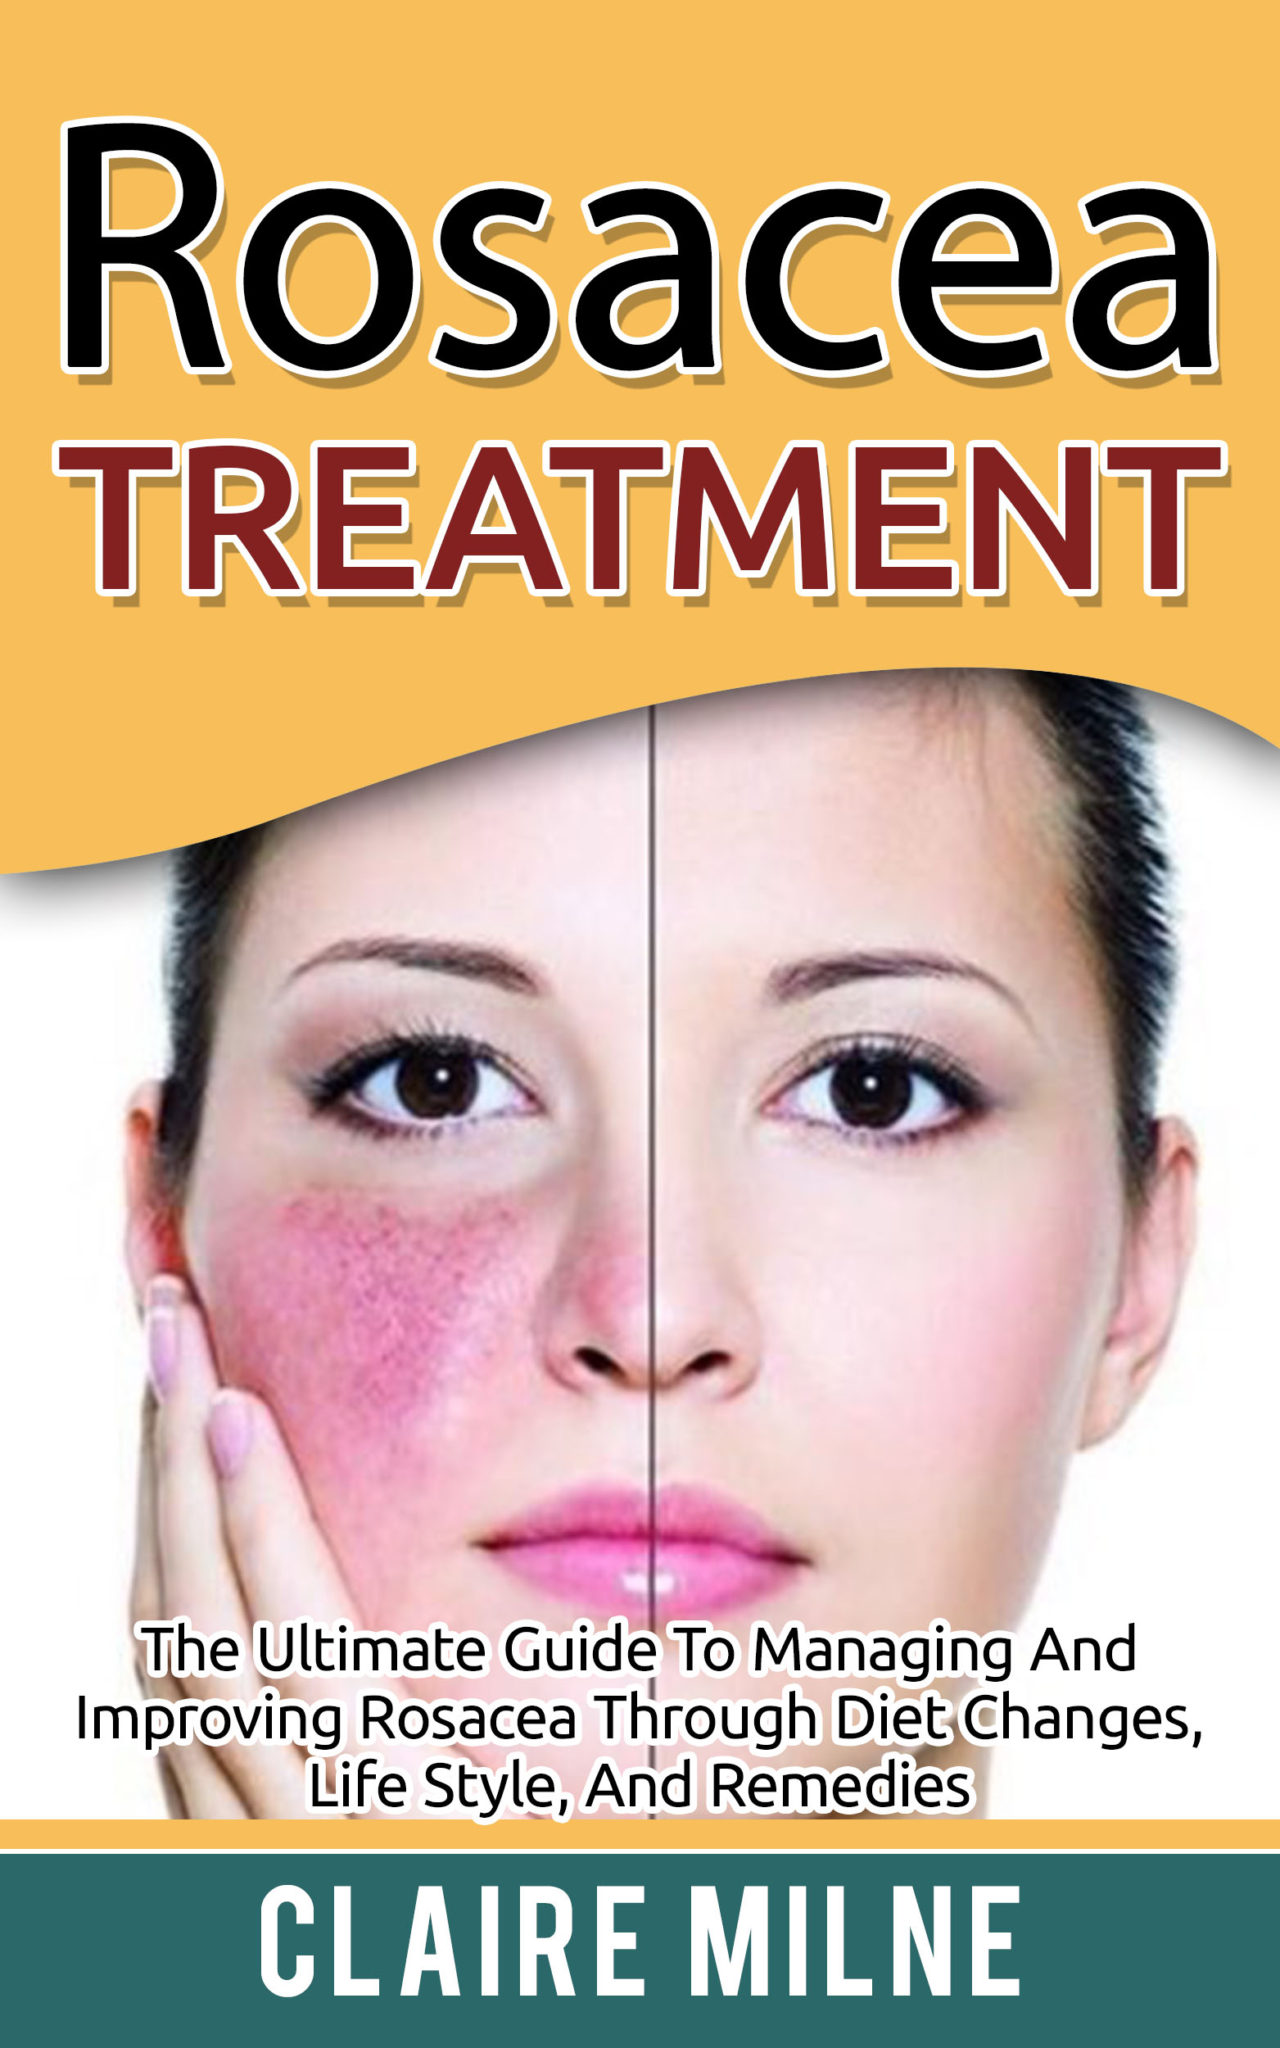 FREE: Rosacea Treatment: The Ultimate Guide To Managing And Improving Rosacea Through Diet Changes, Lifestyle, And Remedies by Claire Milne